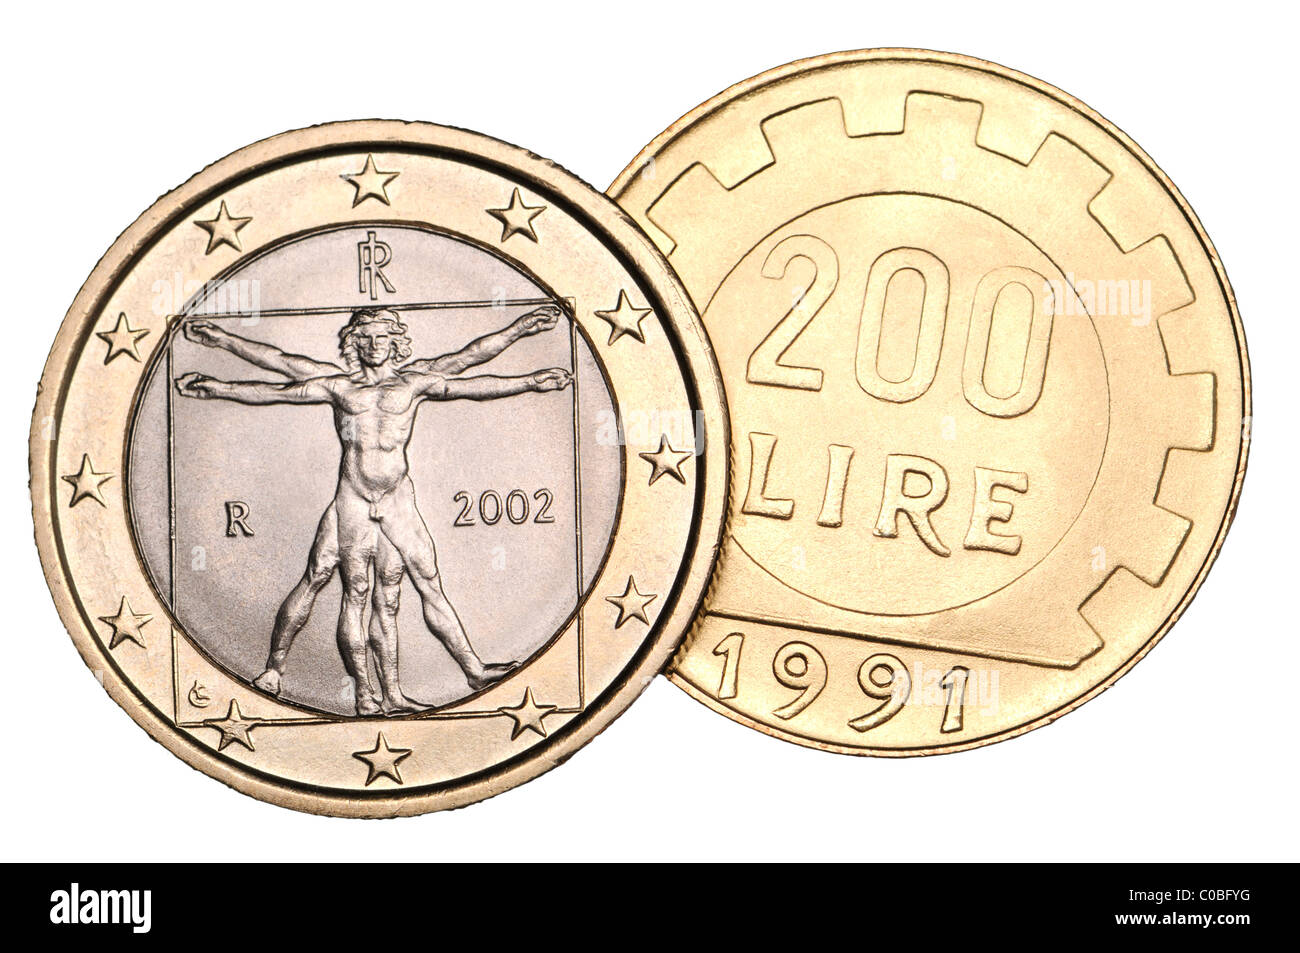 Italian 1 Euro coin from 2002 and 200 Lire coin from 1991 Stock Photo